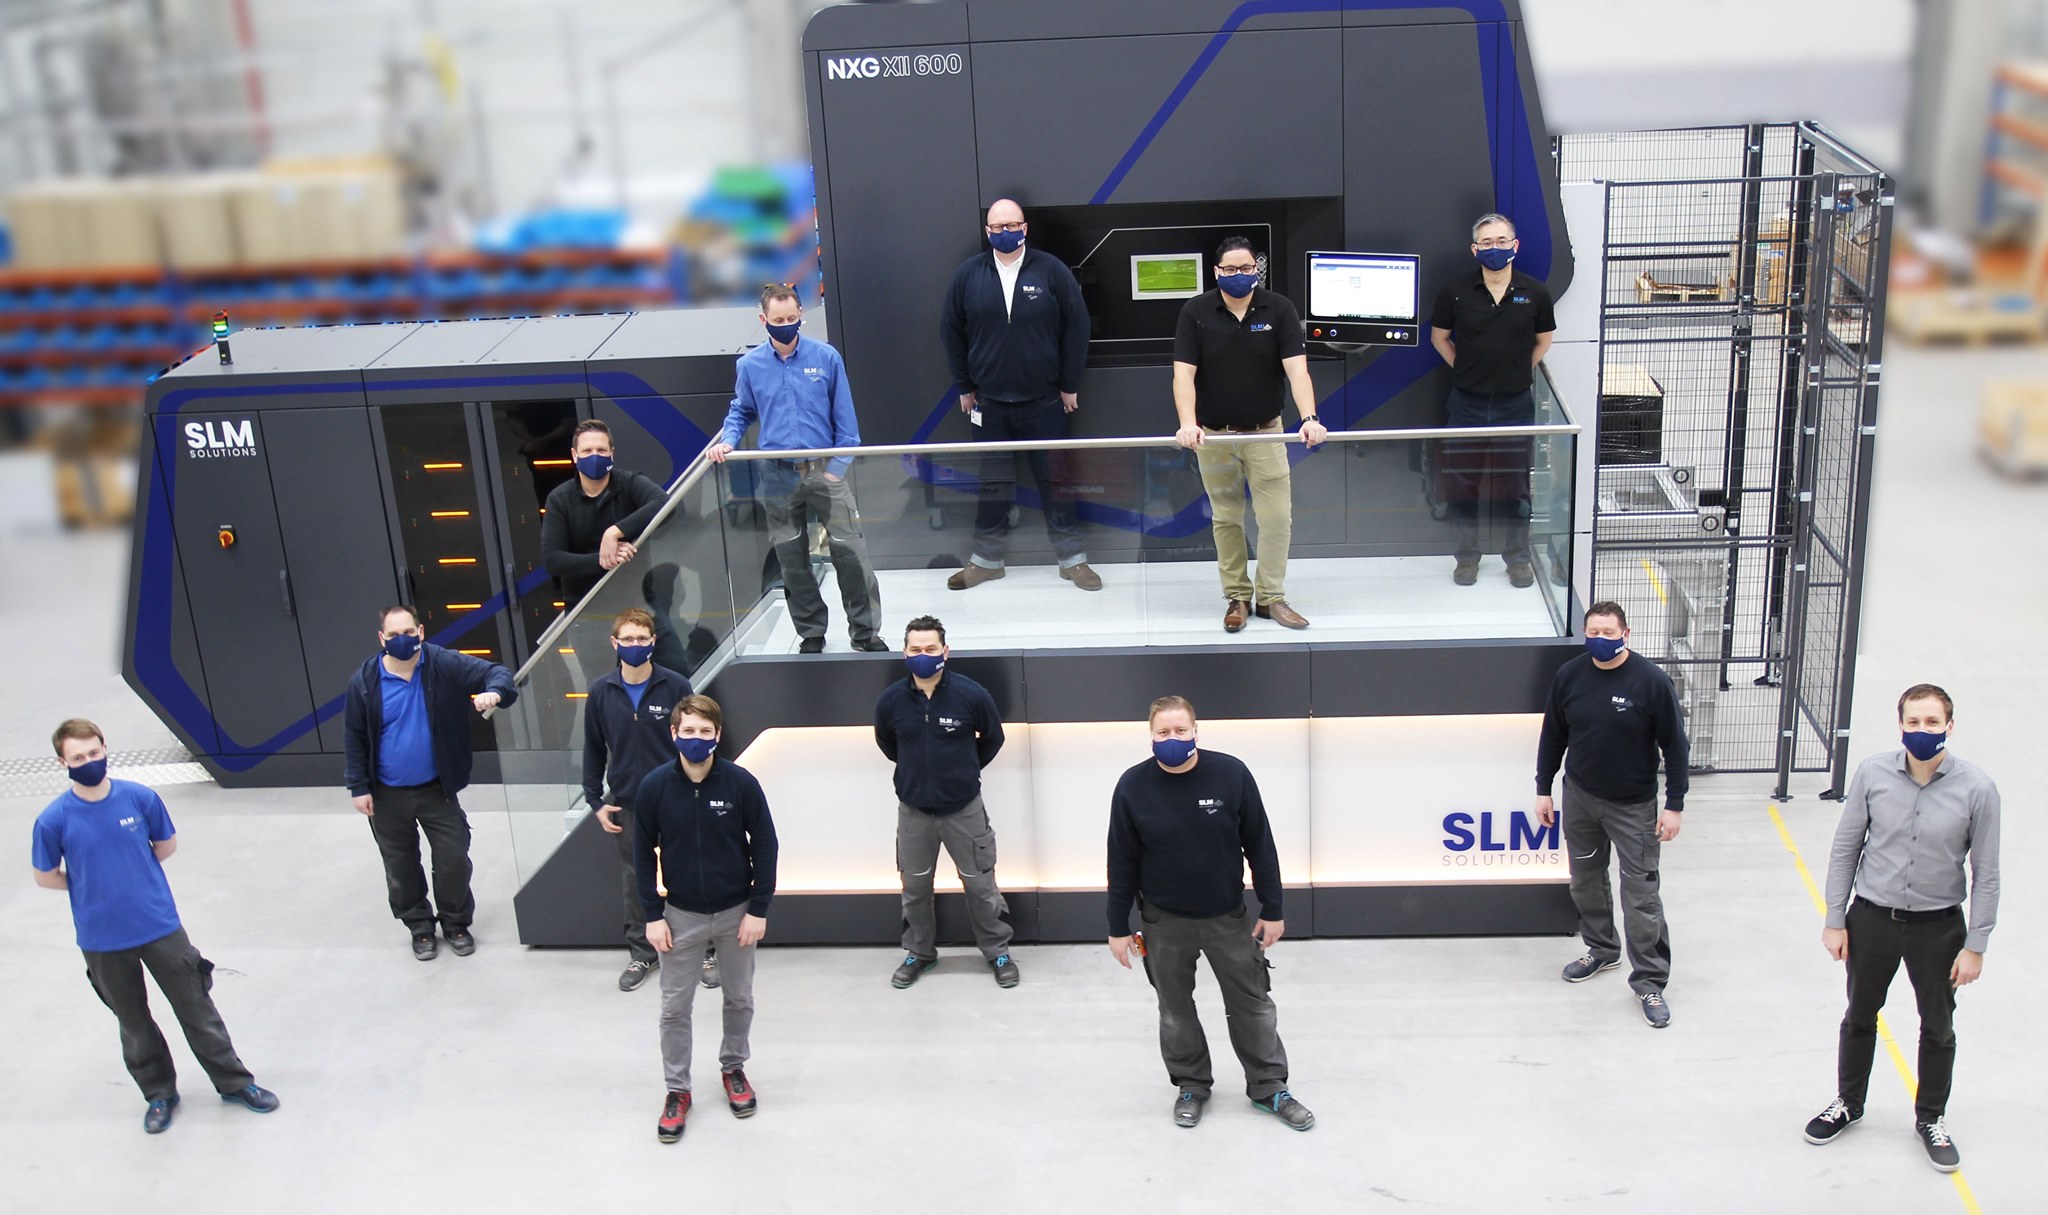 The SLM Solutions team gathered around the new NXG XII 600 system.